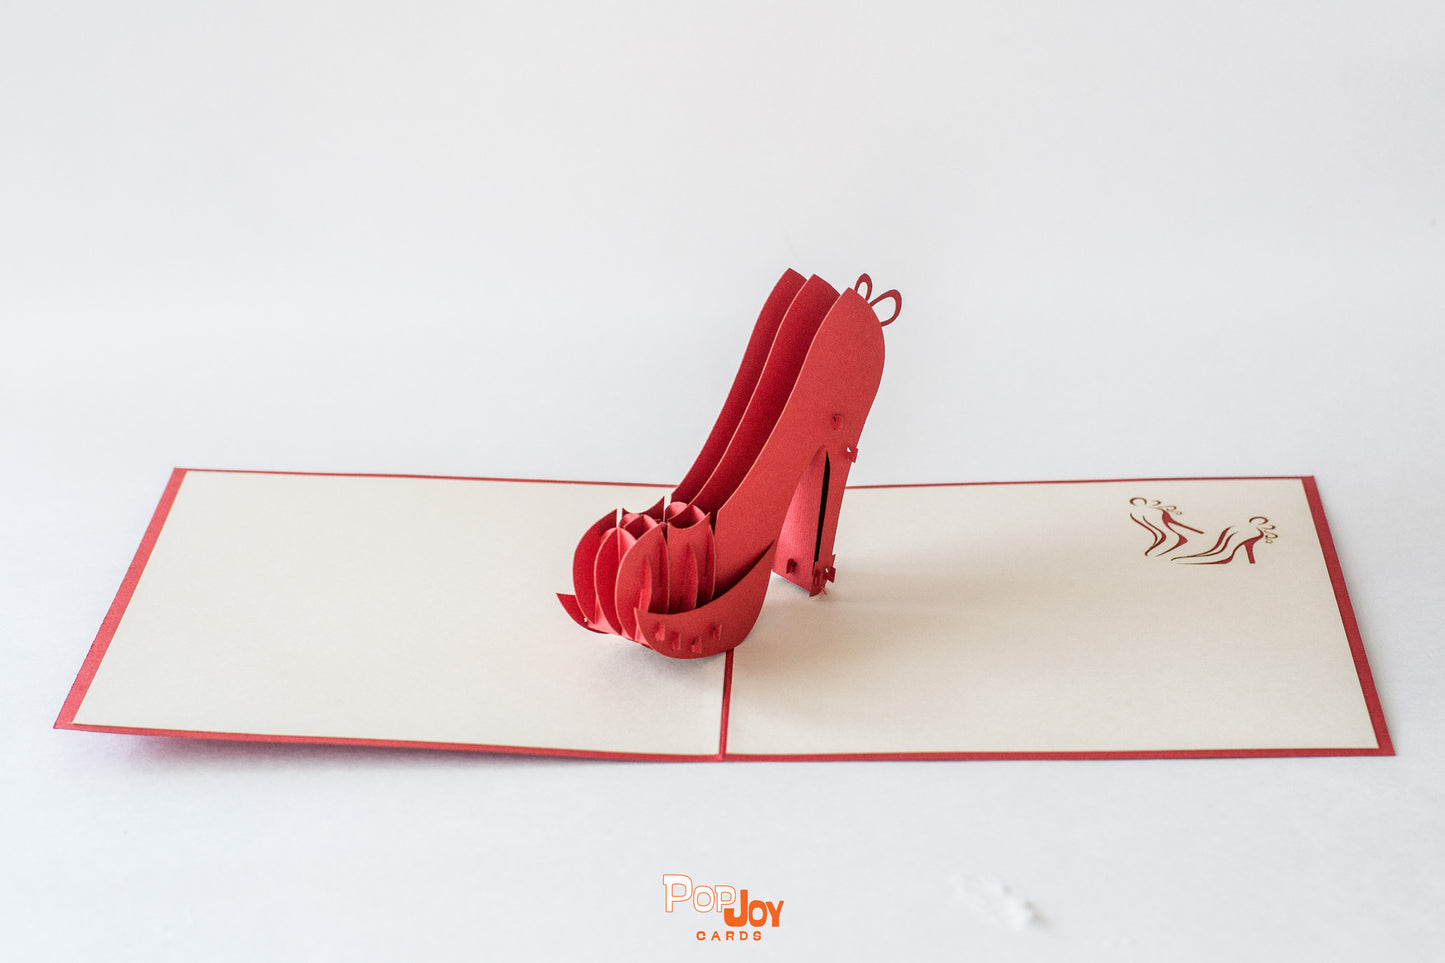 Pop-up card with red heeled shoes in the middle